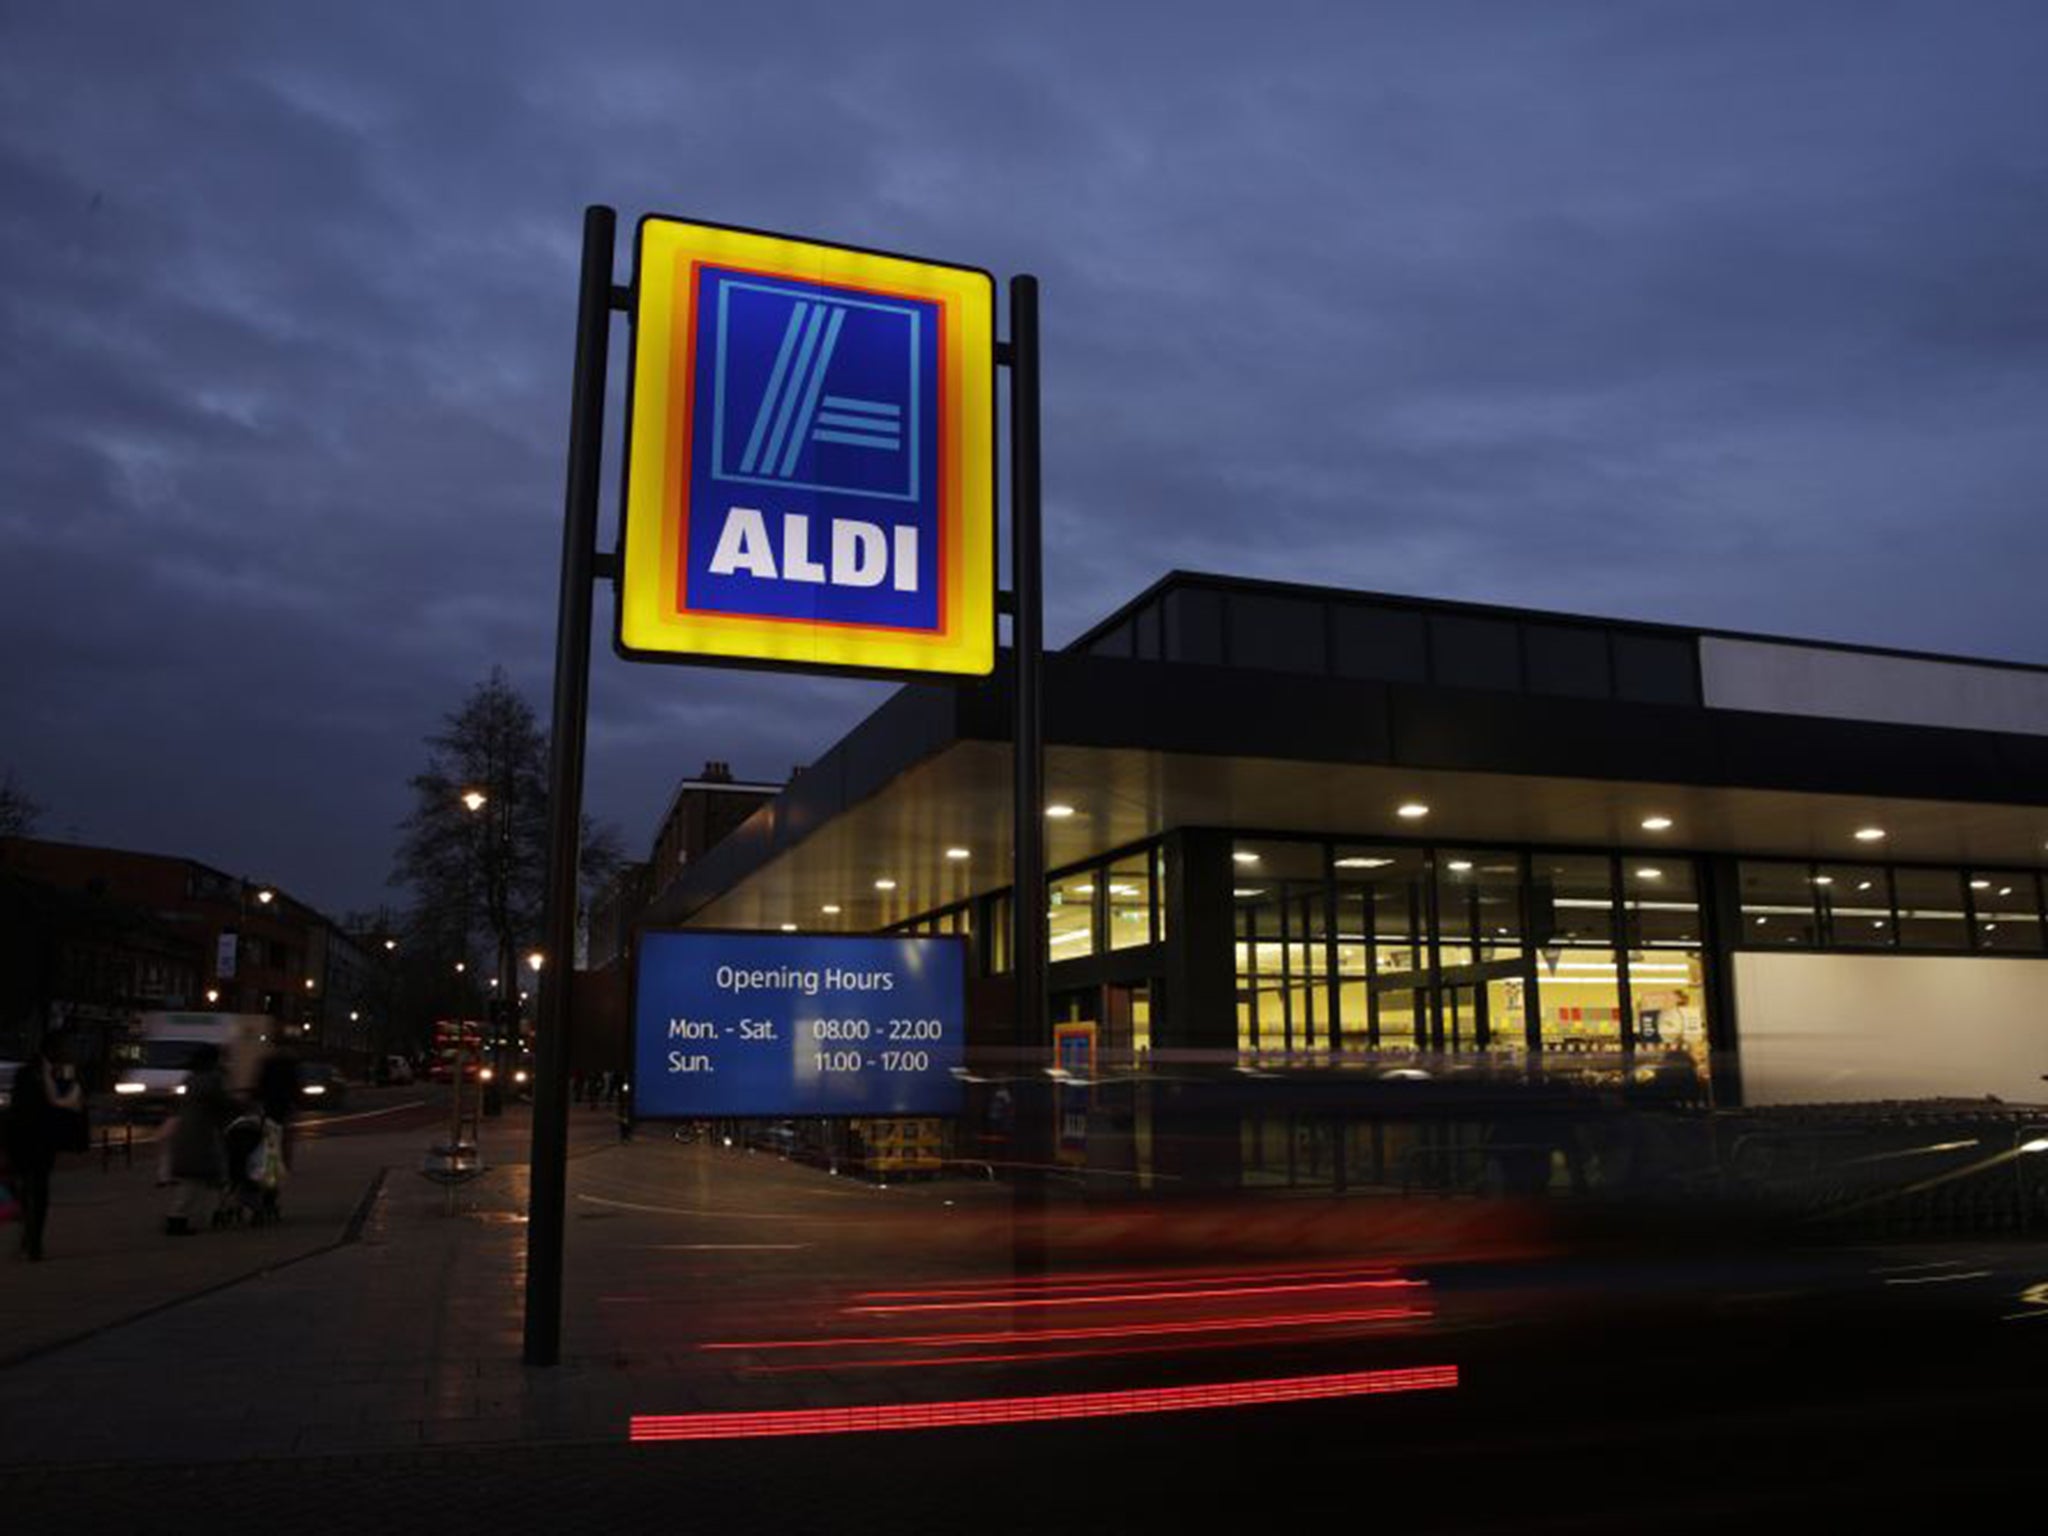 Aldi’s expansion plans will mean its workforce will more than double by 2022 as it looks to take its number of UK shops to 1,000